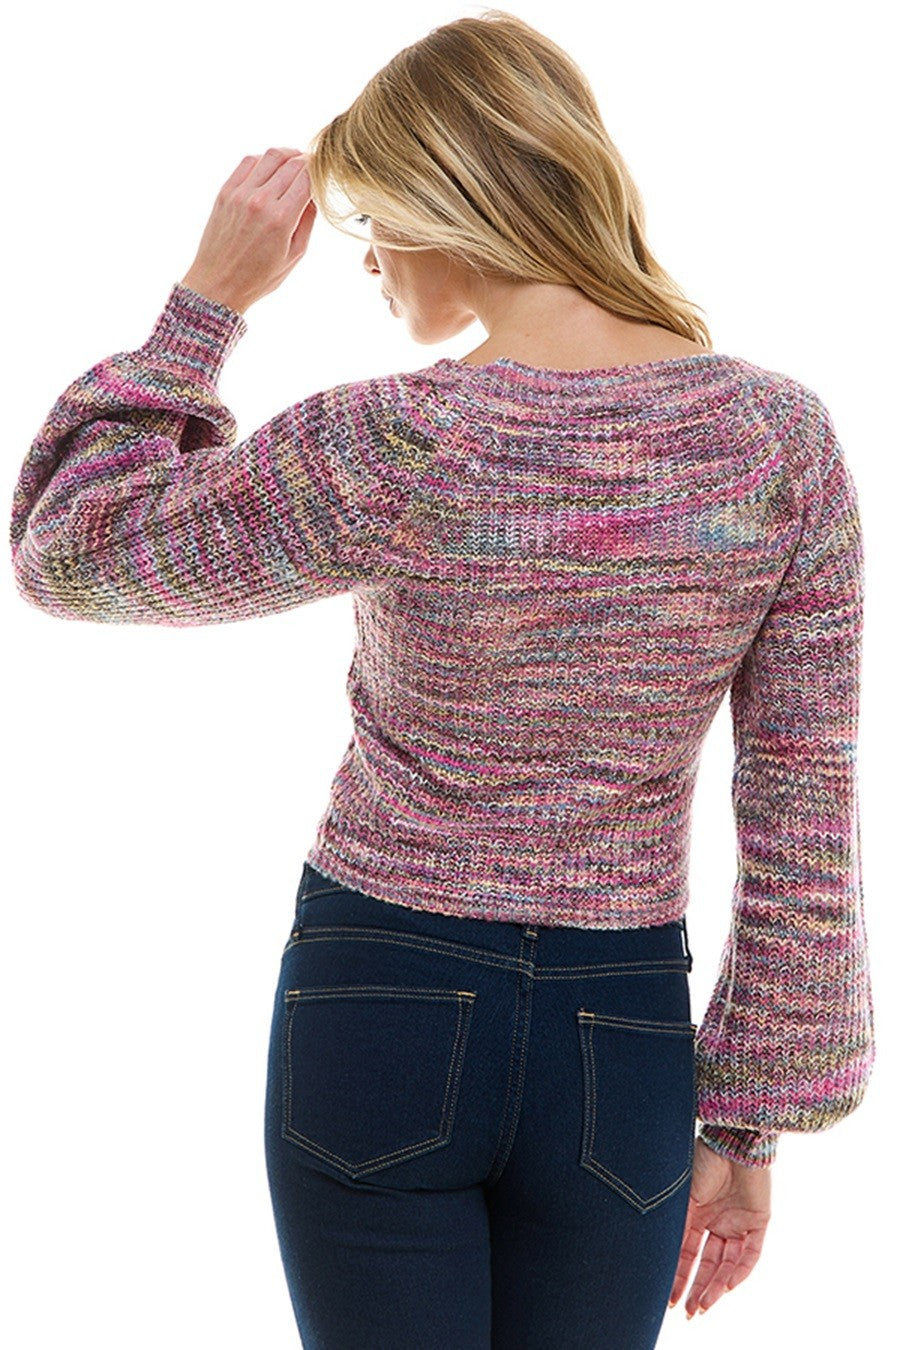 Sweet as Candy Cropped Square Neck Bolero Style Sweater